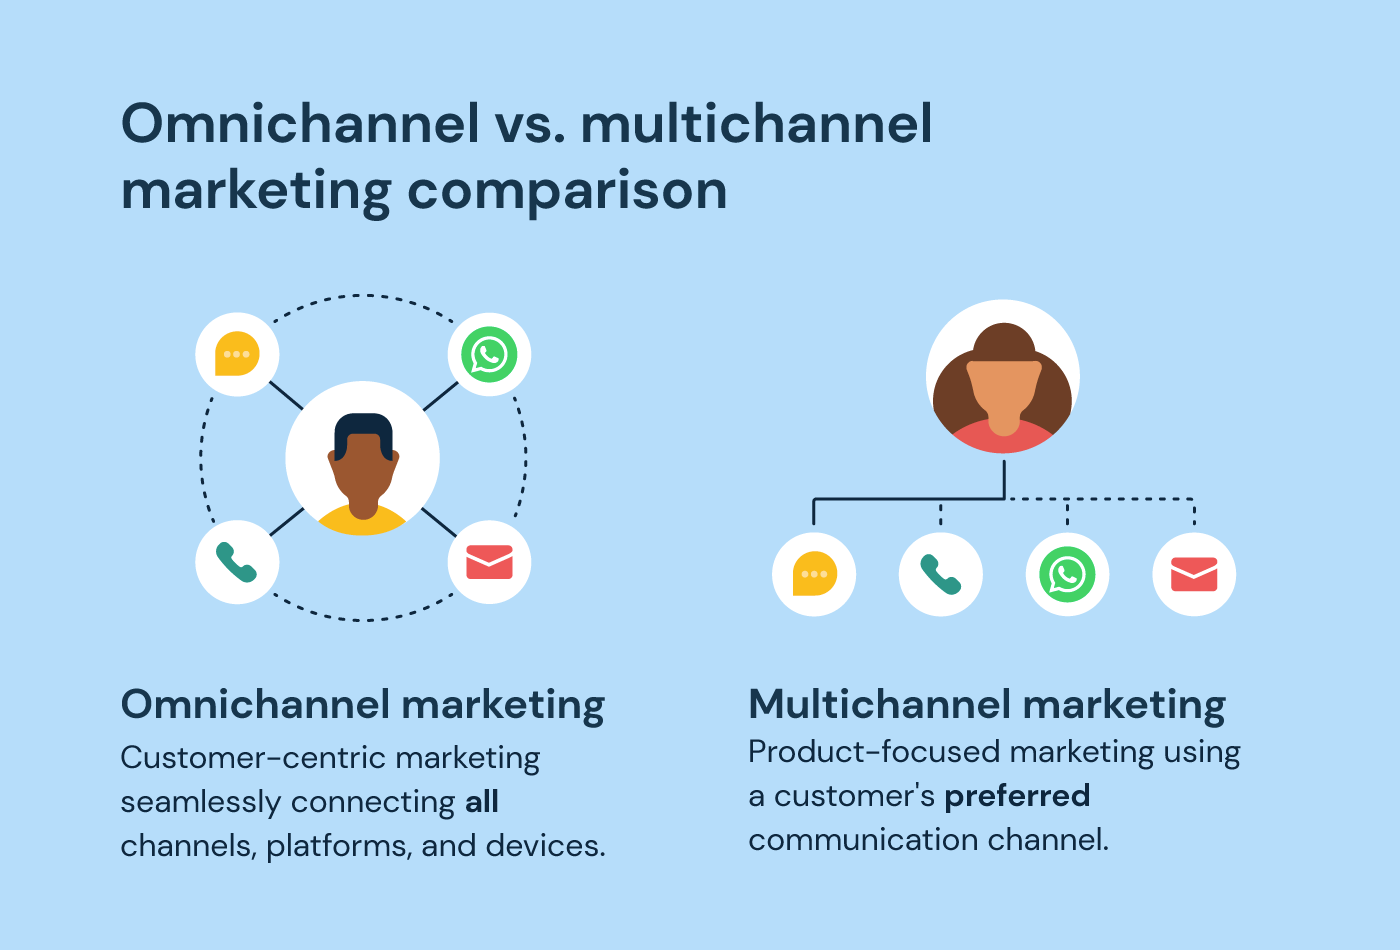 Graphic showing the difference between multichannel (product-driven) and omnichannel (customer-driven) marketing